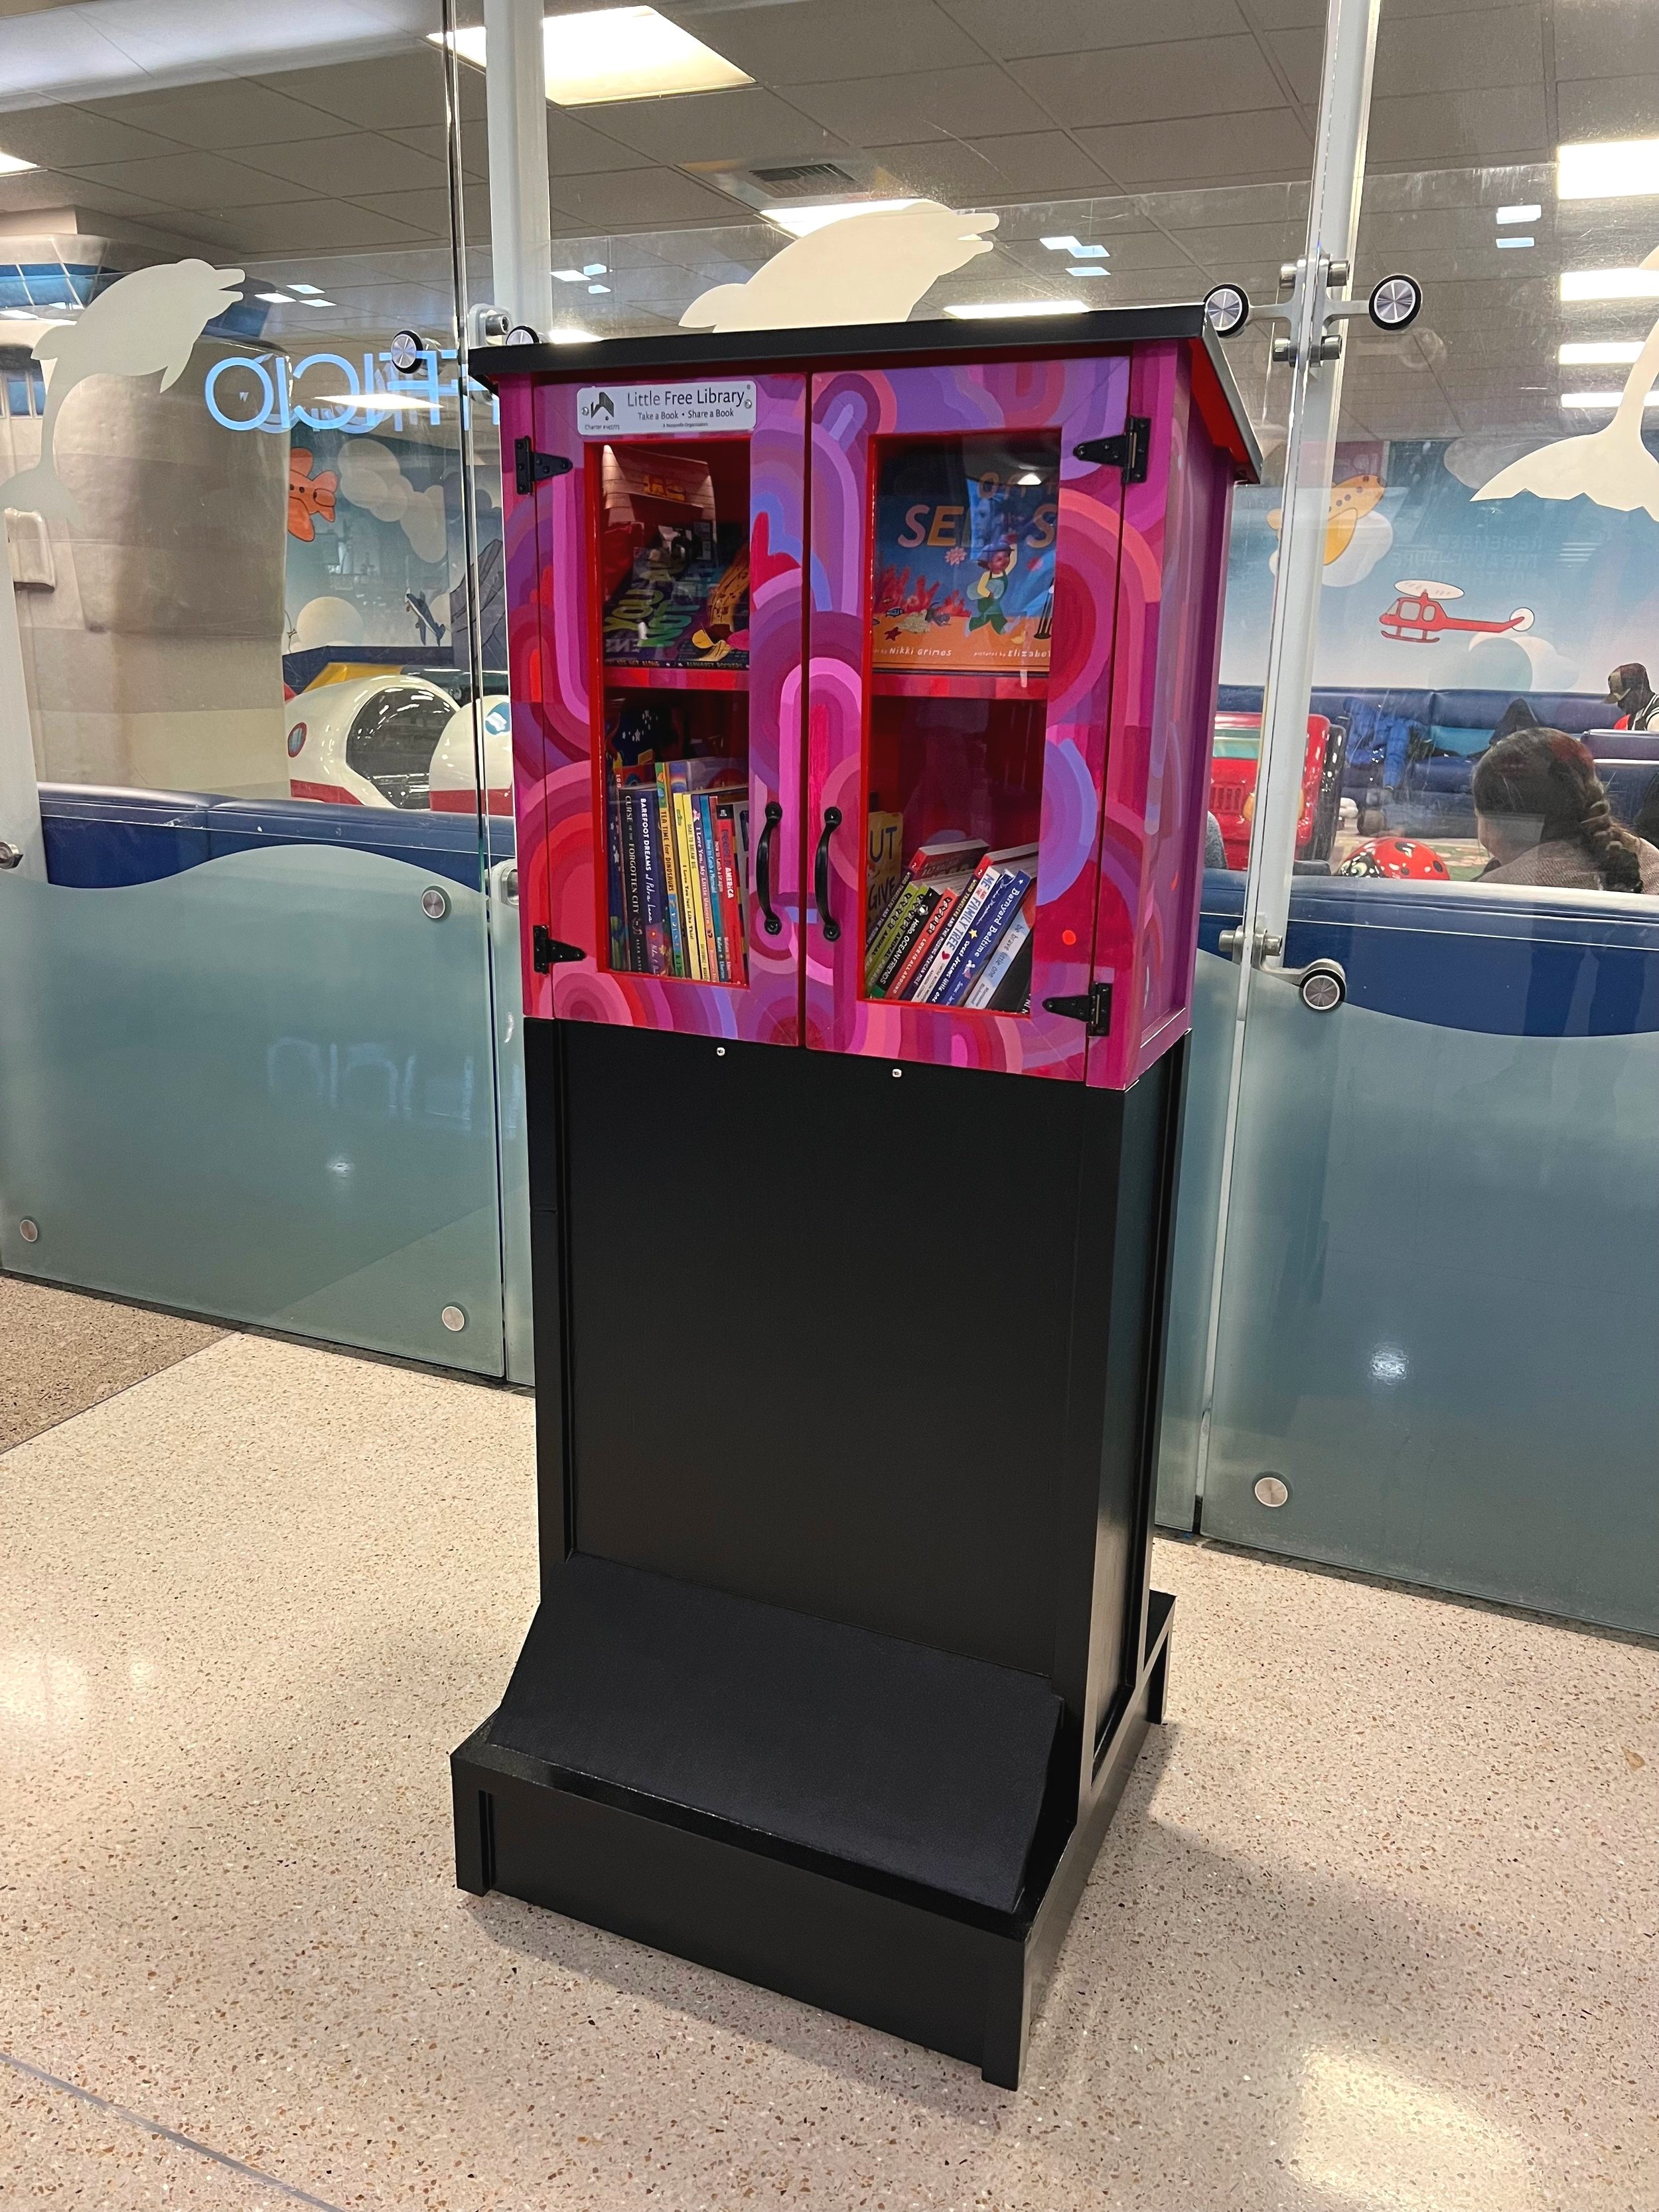 Sea-Tac Airport Free Little Library